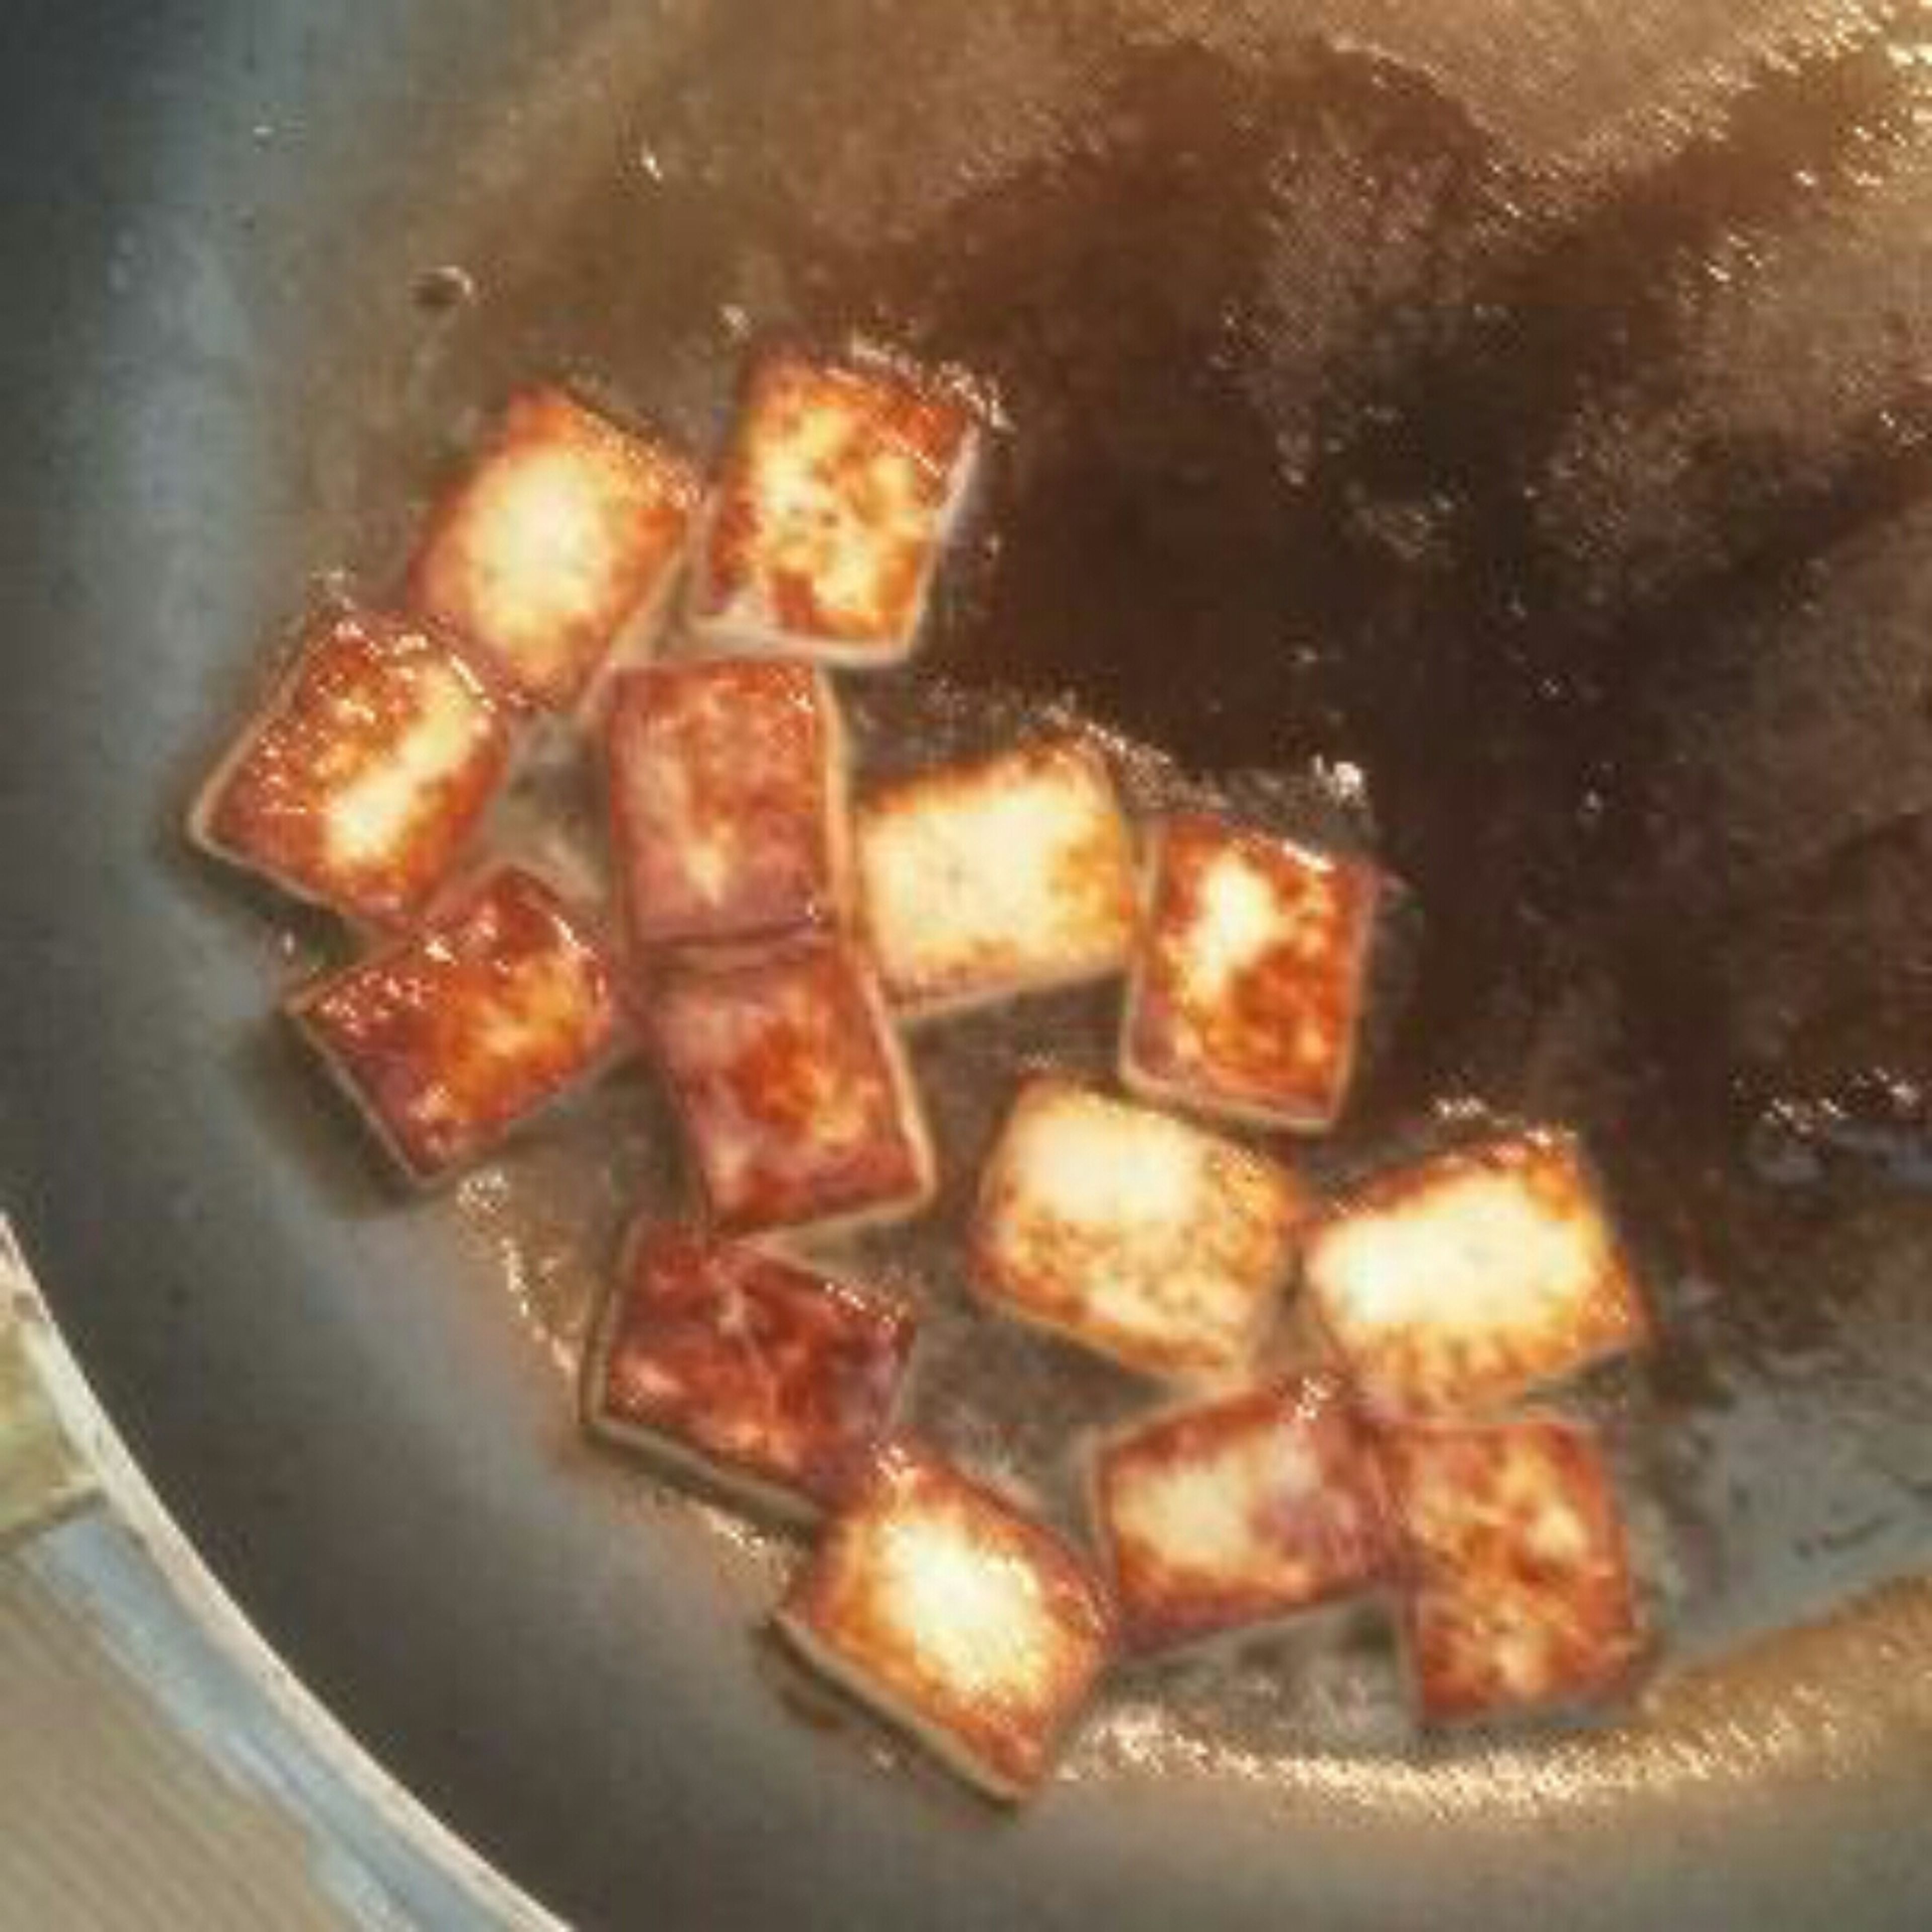 shallow fry the paneer until golden